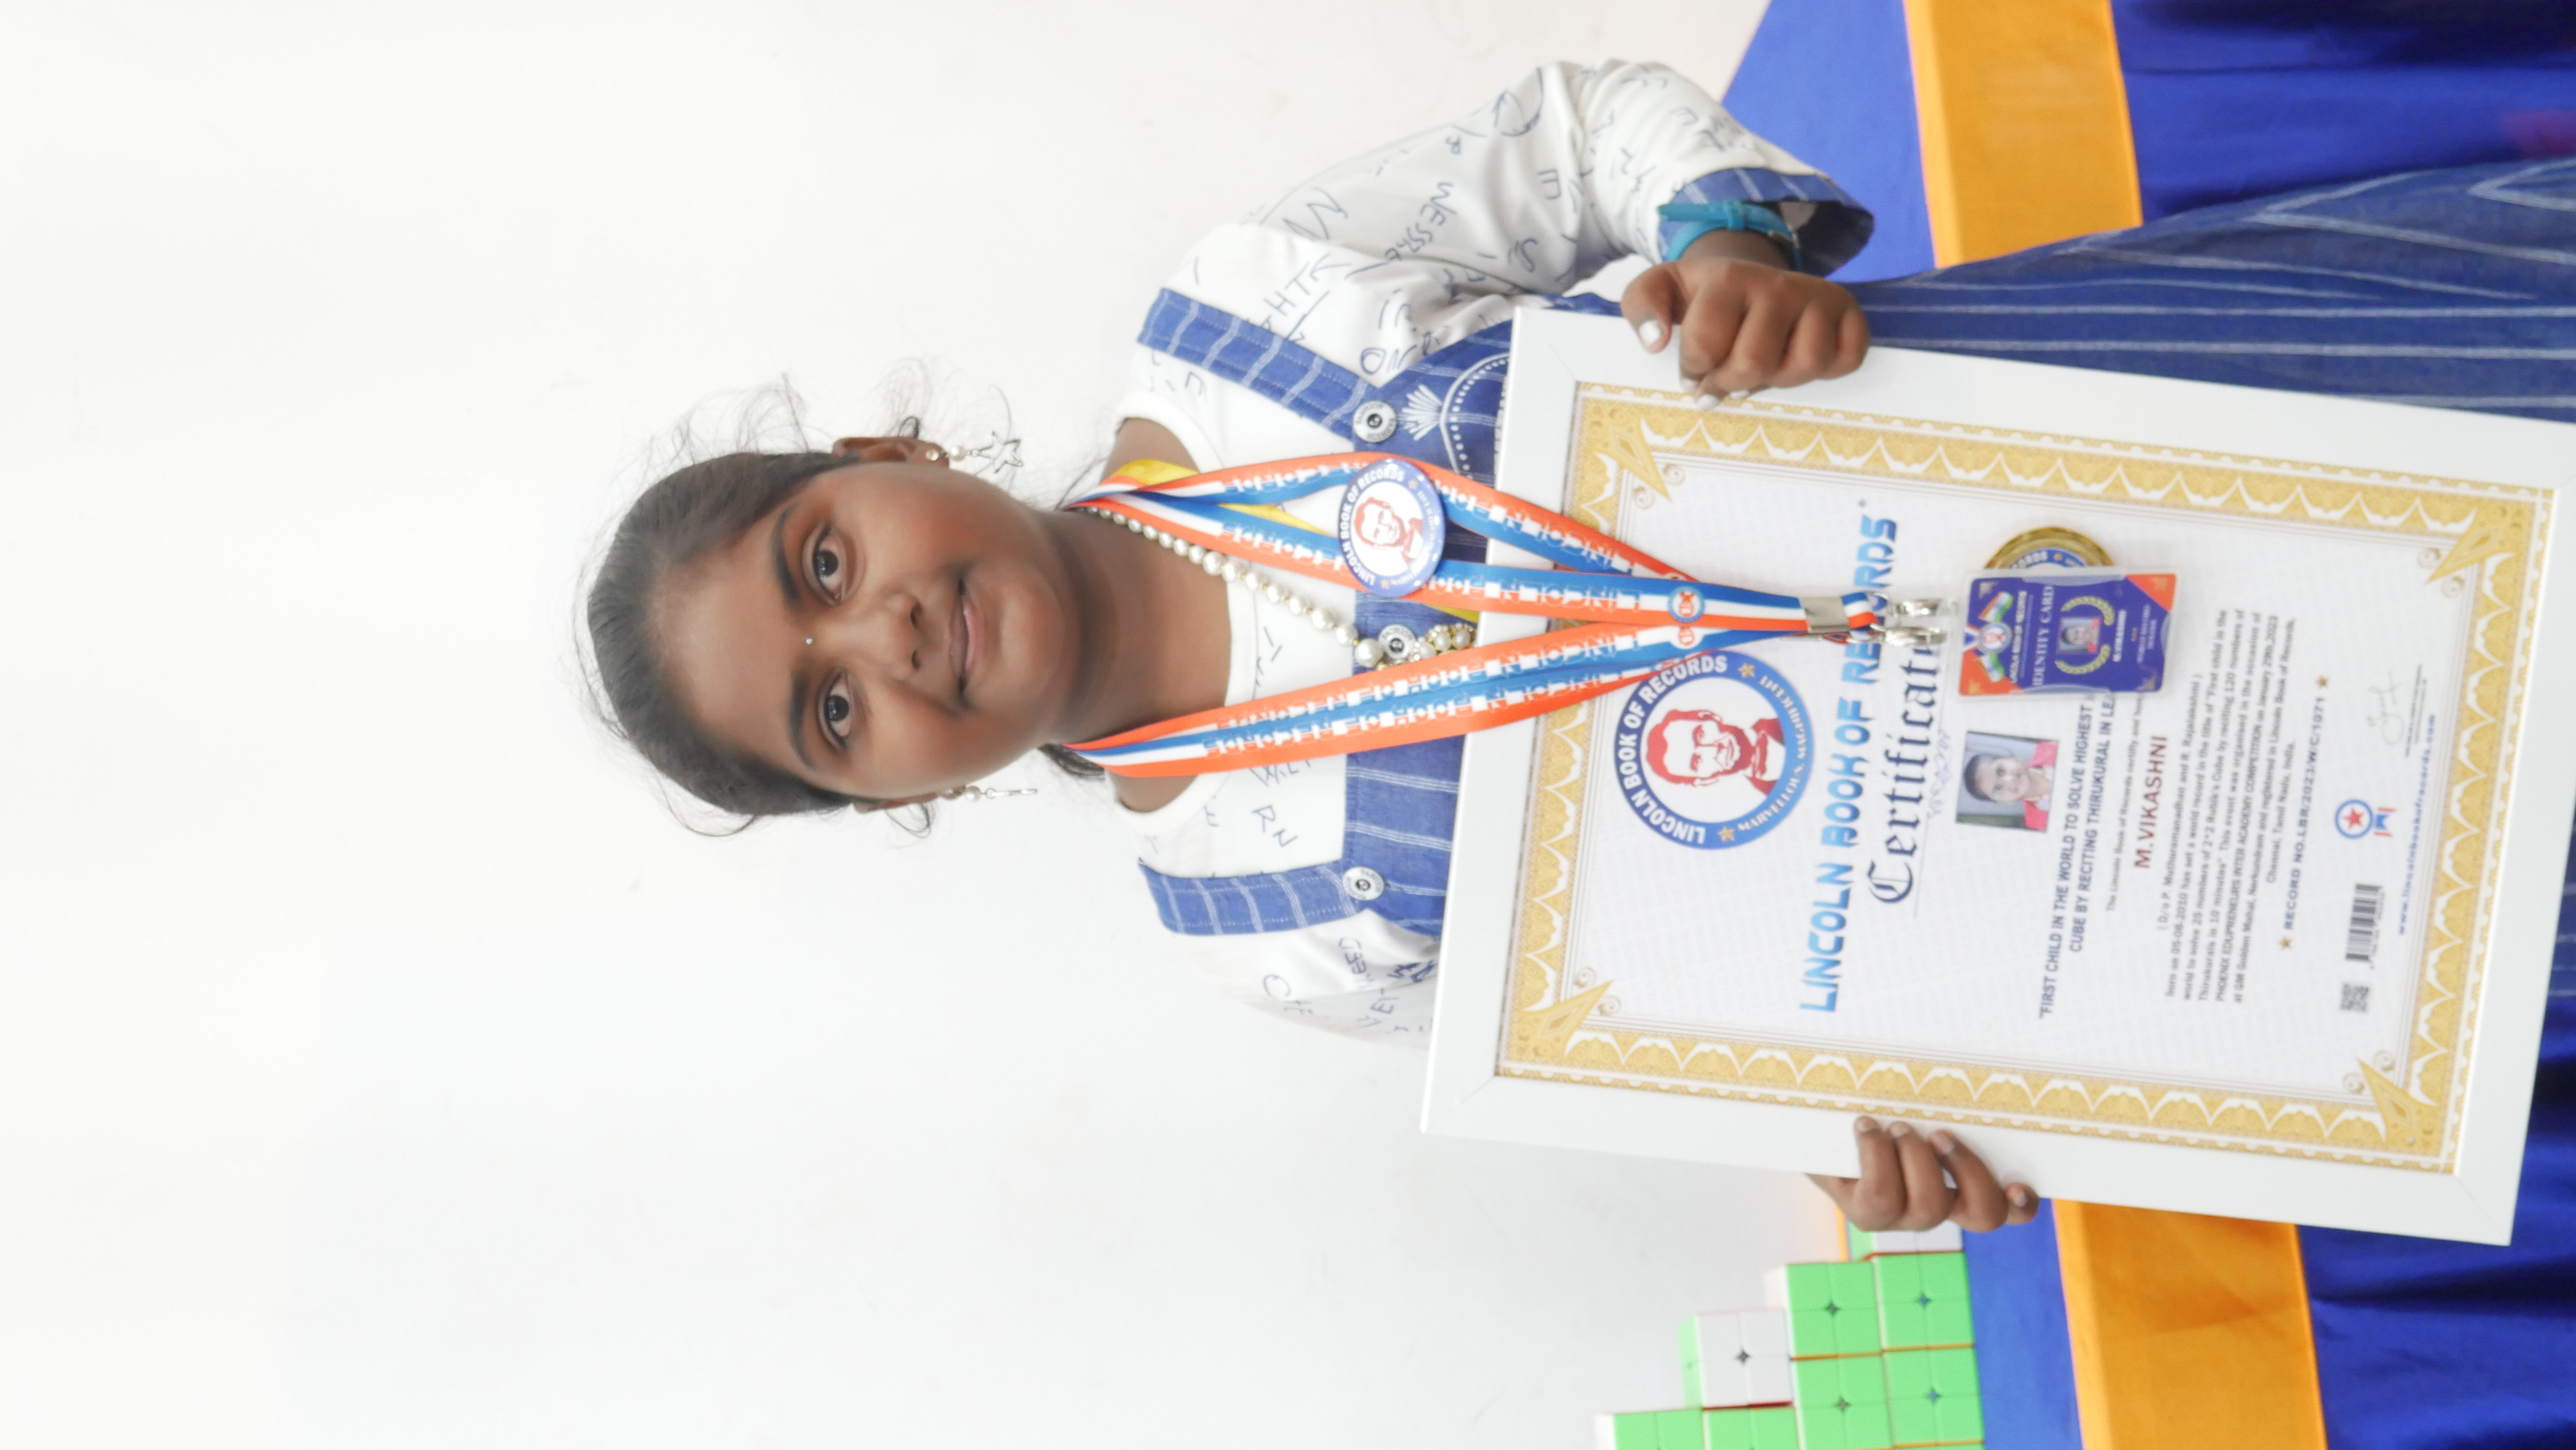 "First child in the world to solve highest number 2*2 Rubik's  Cube by reciting Thirukural in least time "